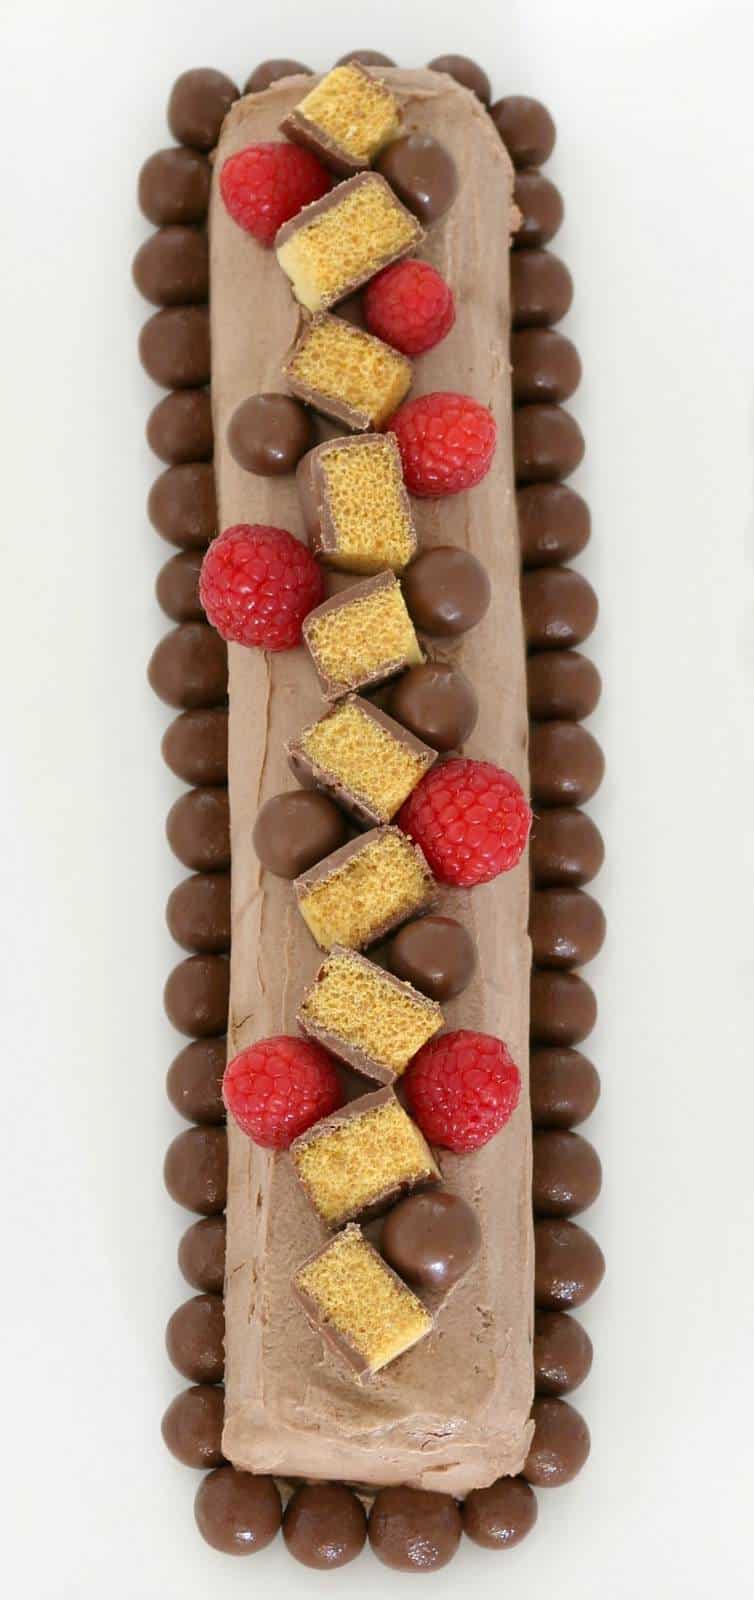 An overhead shot of a chocolate log cake topped with chopped chocolate honeycomb, raspberries and Maltesers